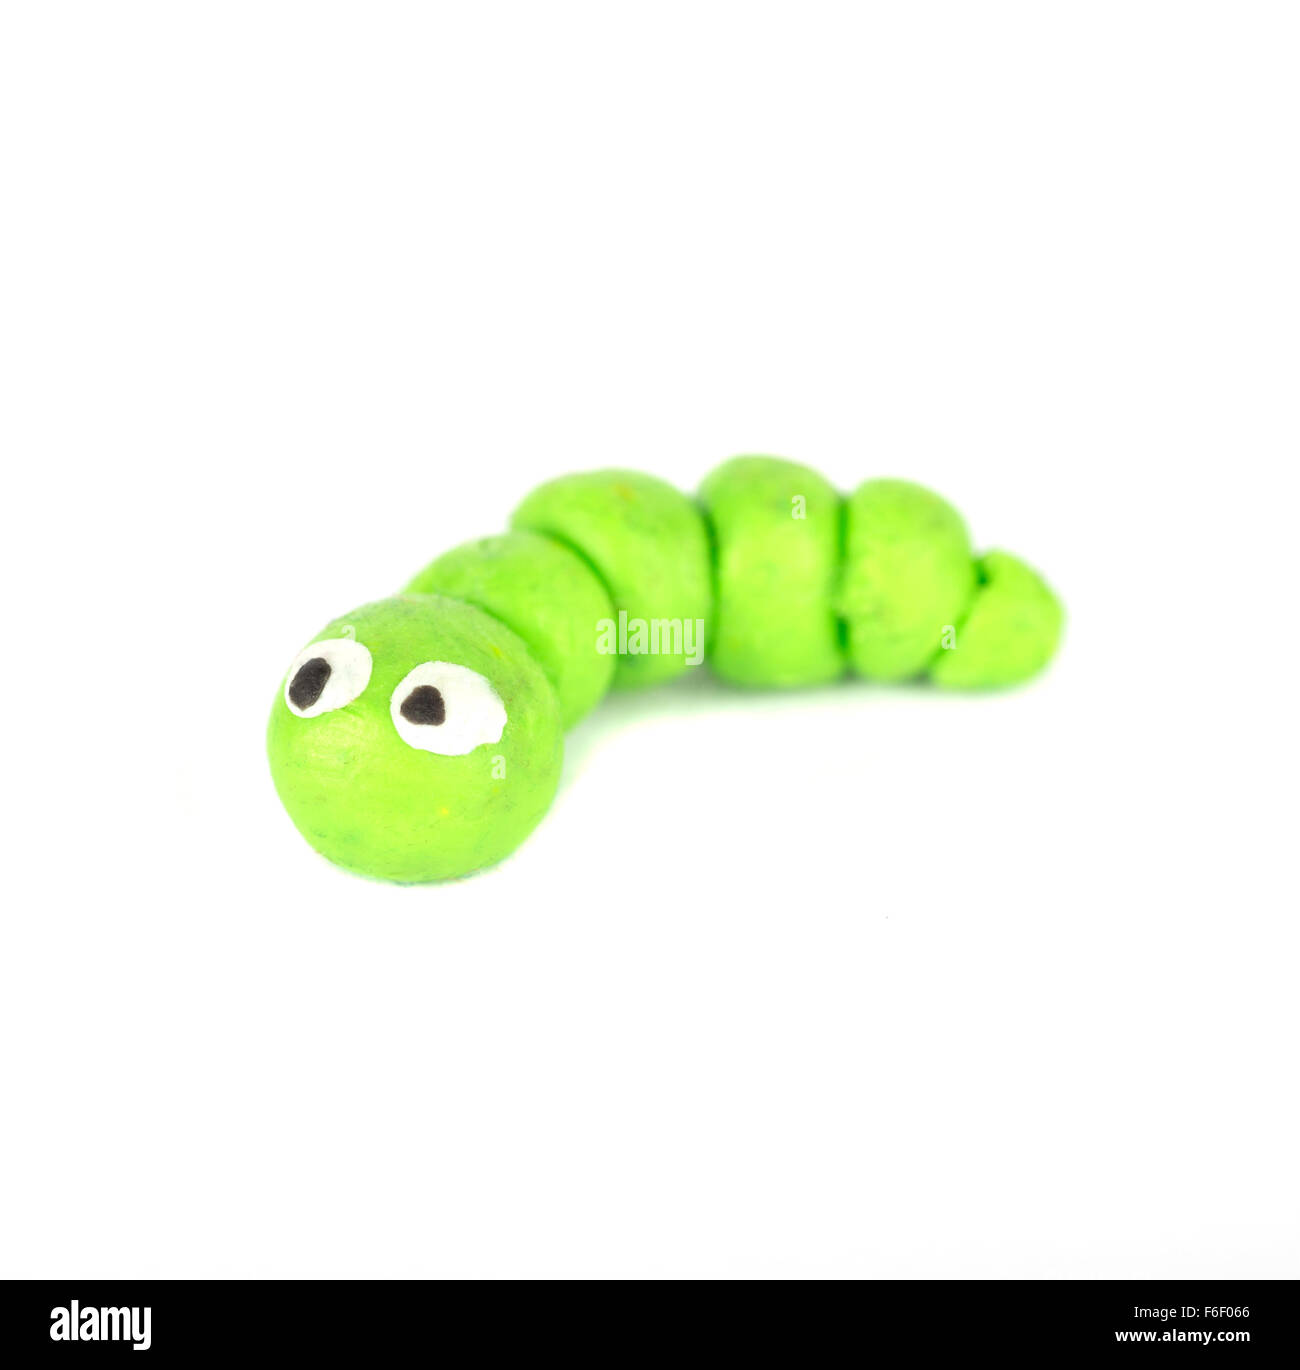 Hand made plasticine or modeling clay figure of a caterpillar on white background Stock Photo